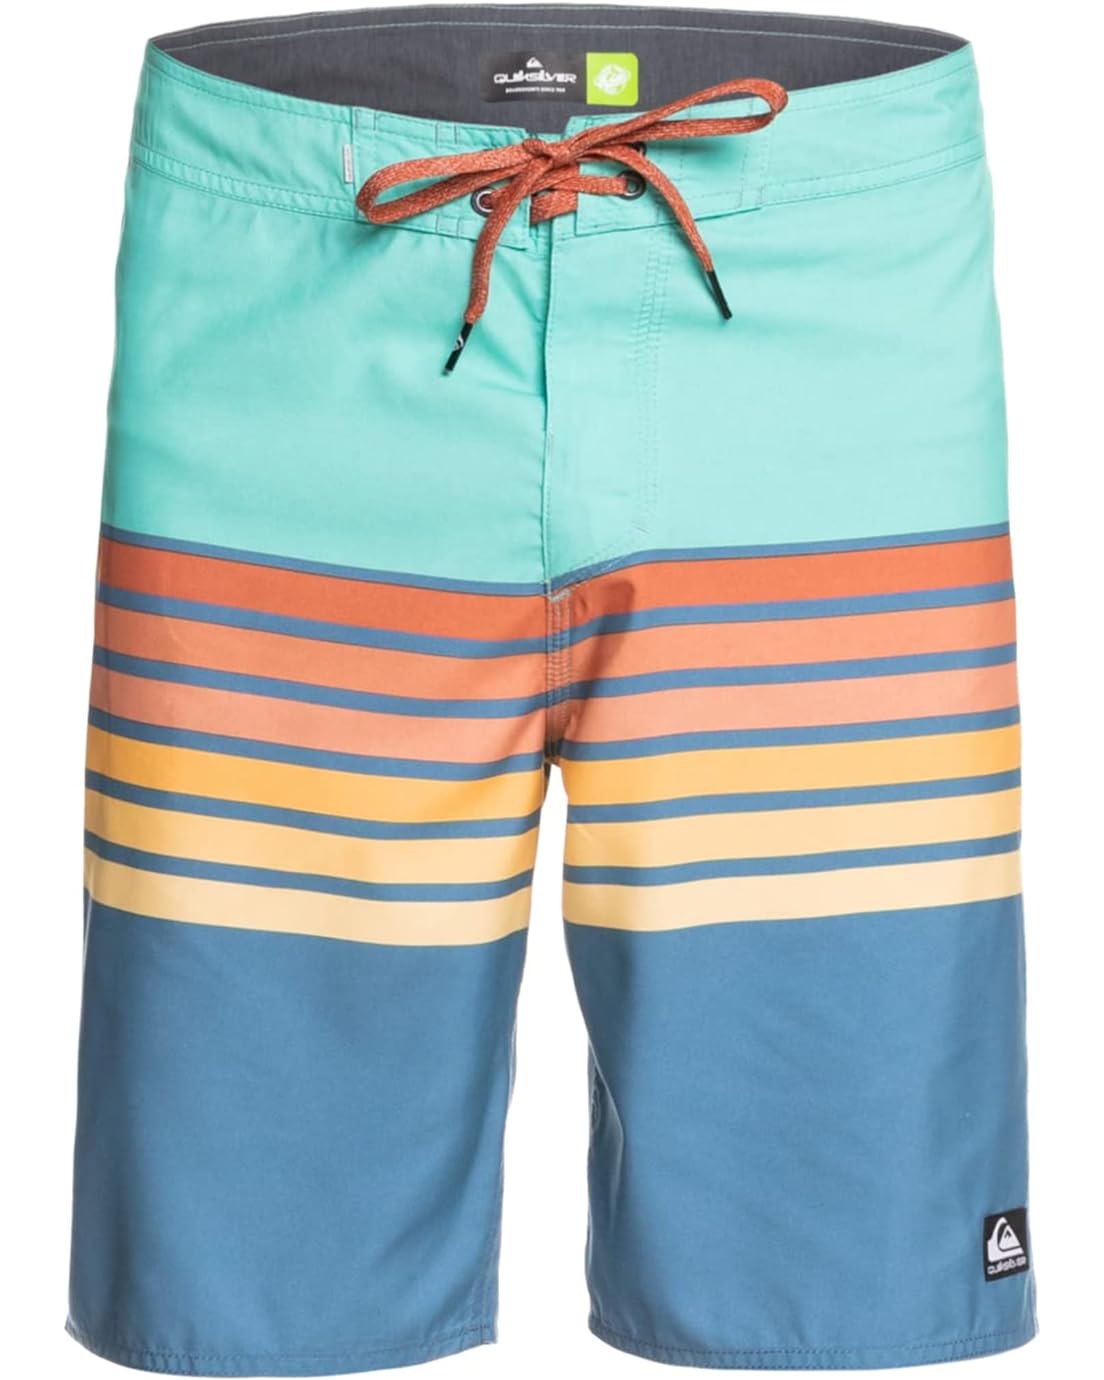 Quiksilver Everyday Swell Vision 20 Boardshorts